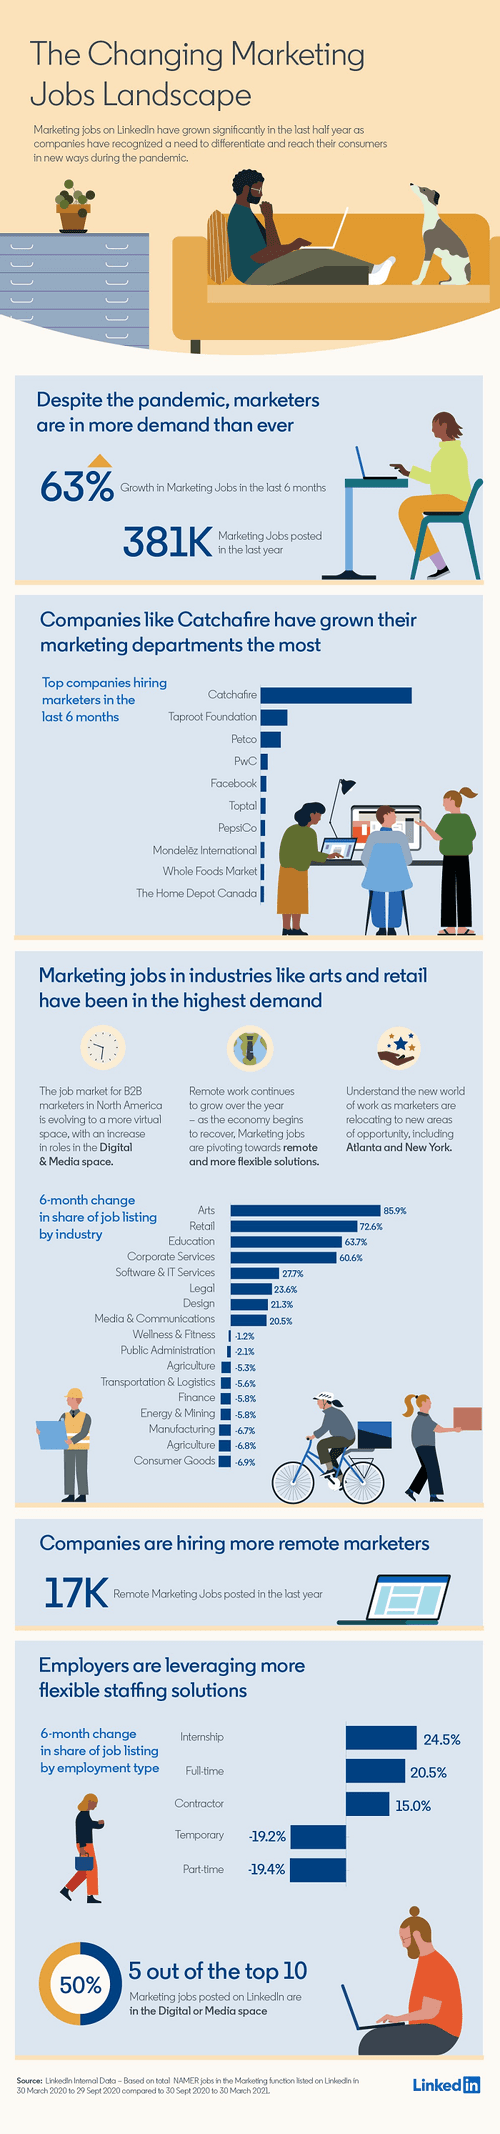 LinkedIn Shares New Insight Into the Most In-Demand Marketing Roles and Skills [Infographic]